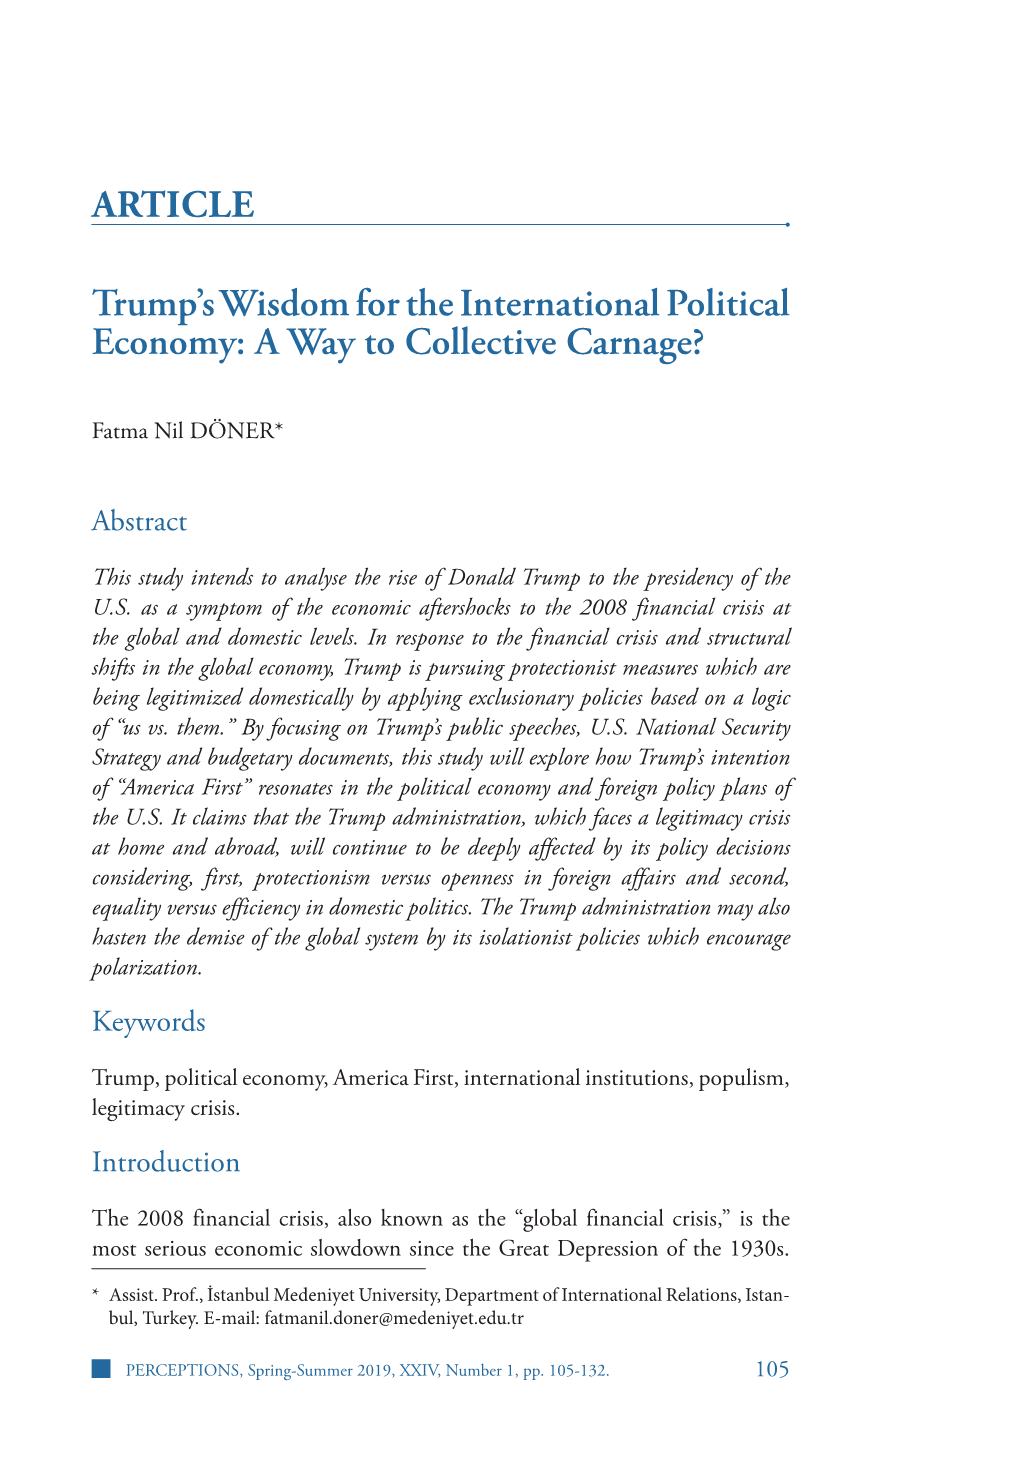 ARTICLE Trump's Wisdom for the International Political Economy: a Way to Collective Carnage?